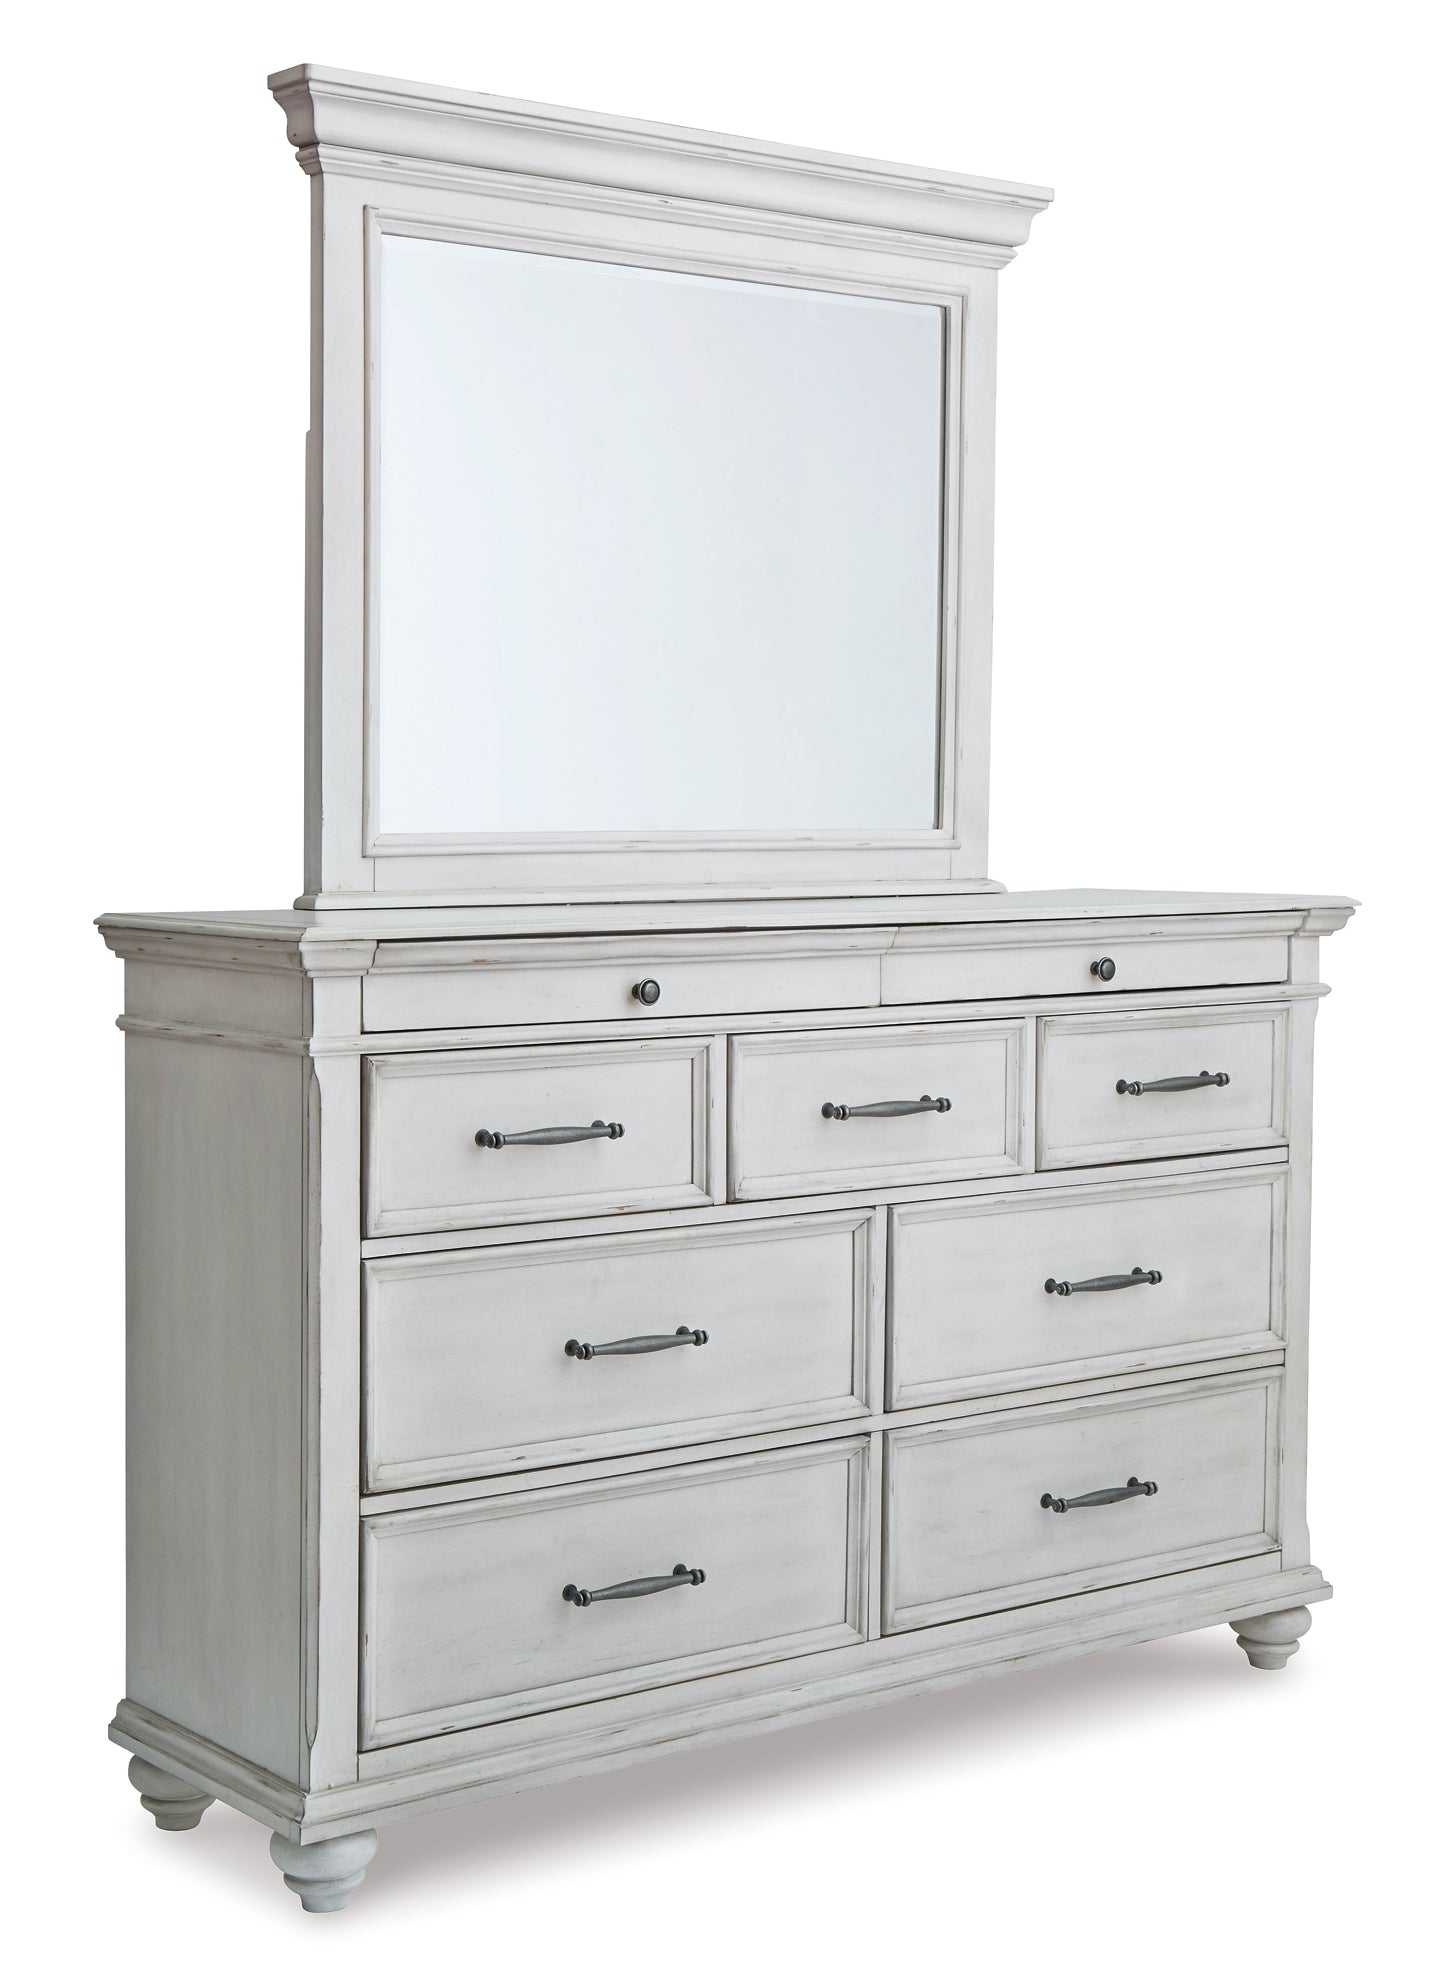 Kanwyn Queen Panel Bed with Mirrored Dresser, Chest and 2 Nightstands at Cloud 9 Mattress & Furniture furniture, home furnishing, home decor